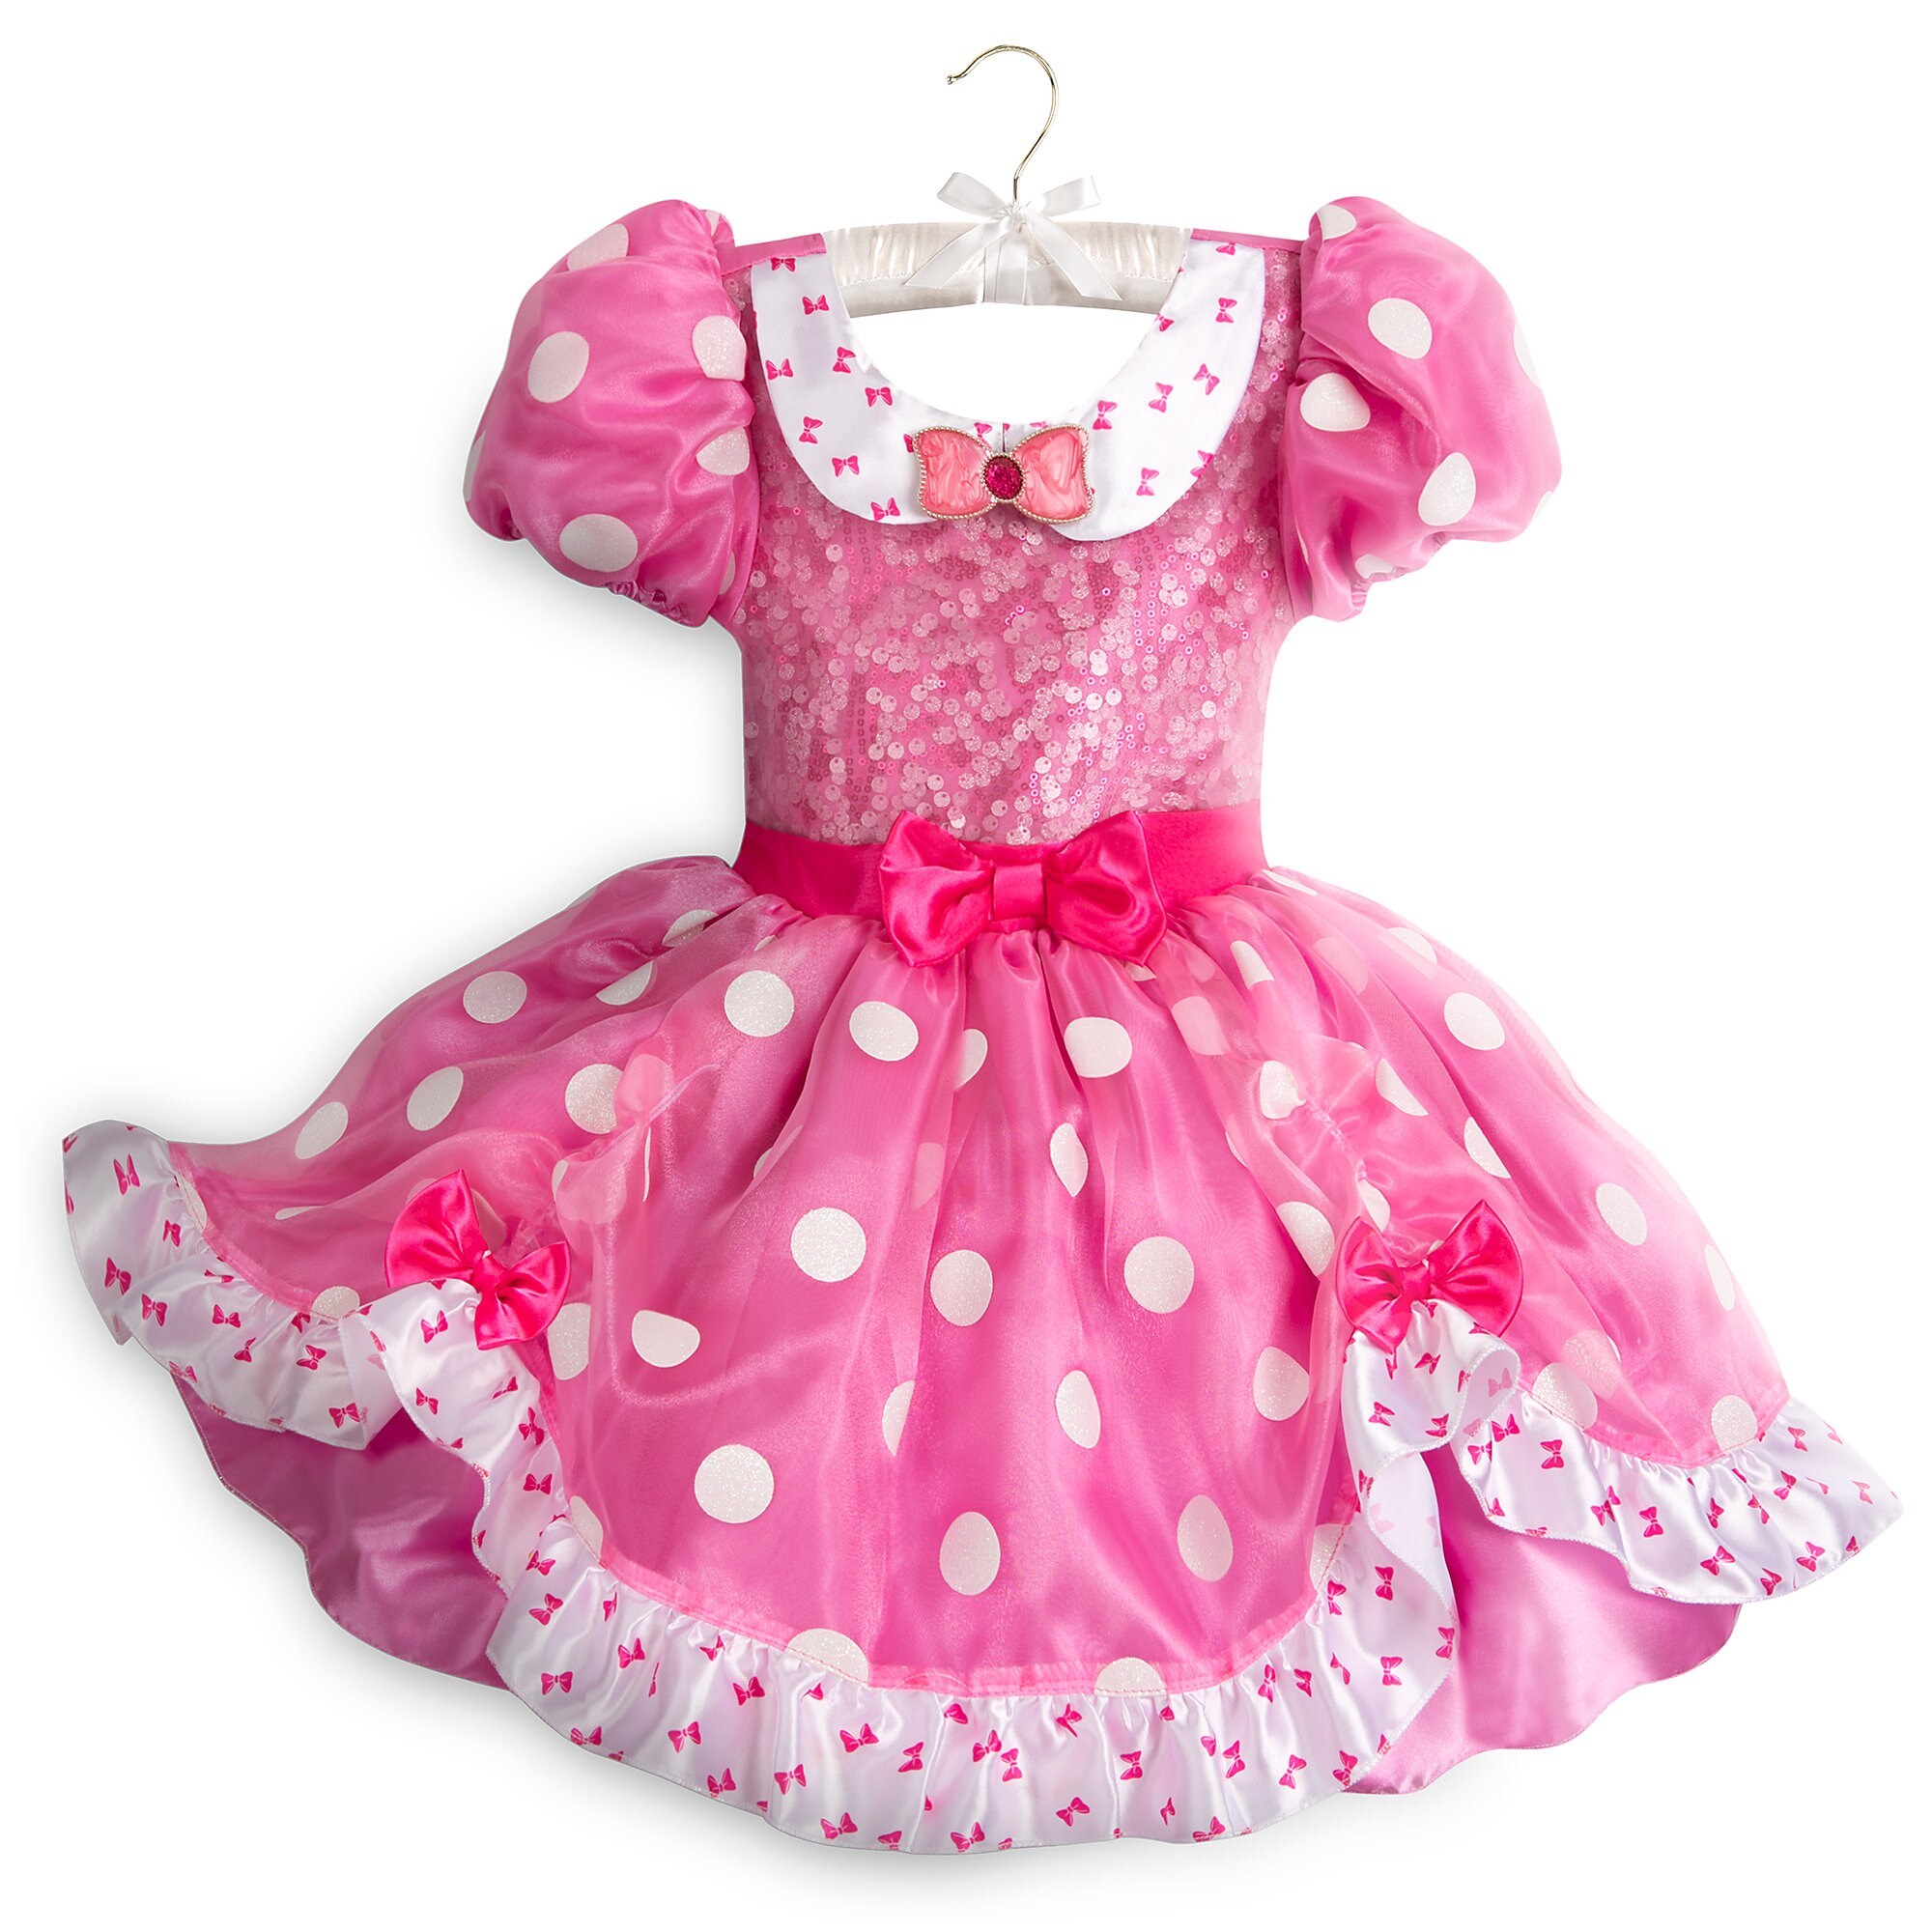 Minnie Mouse Costume for Kids - Pink is now available – Dis Merchandise ...